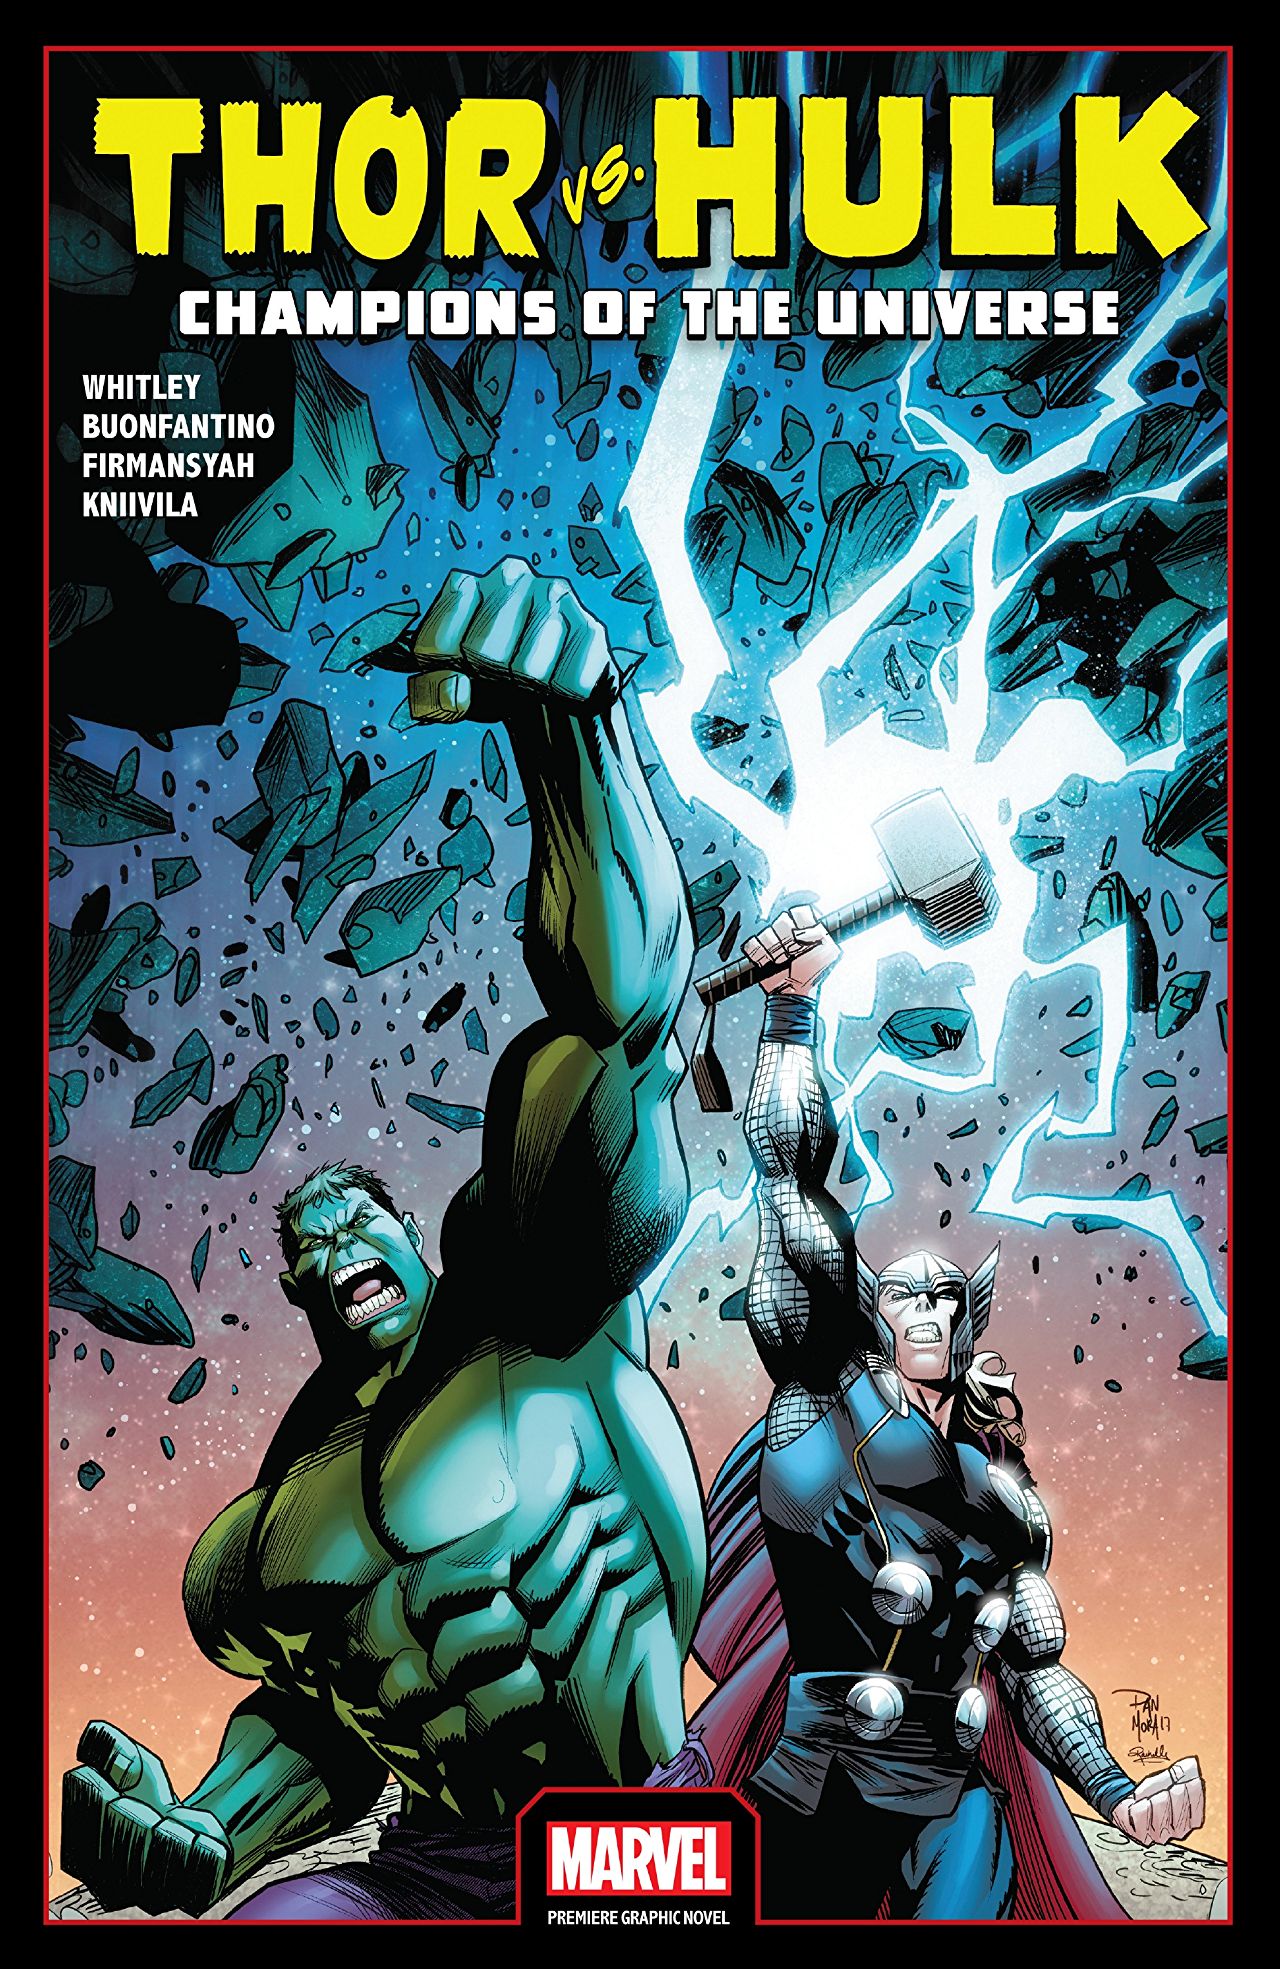 Thor vs Hulk: Champions of the Universe review: Thor and Hulk doing Thor and Hulk things